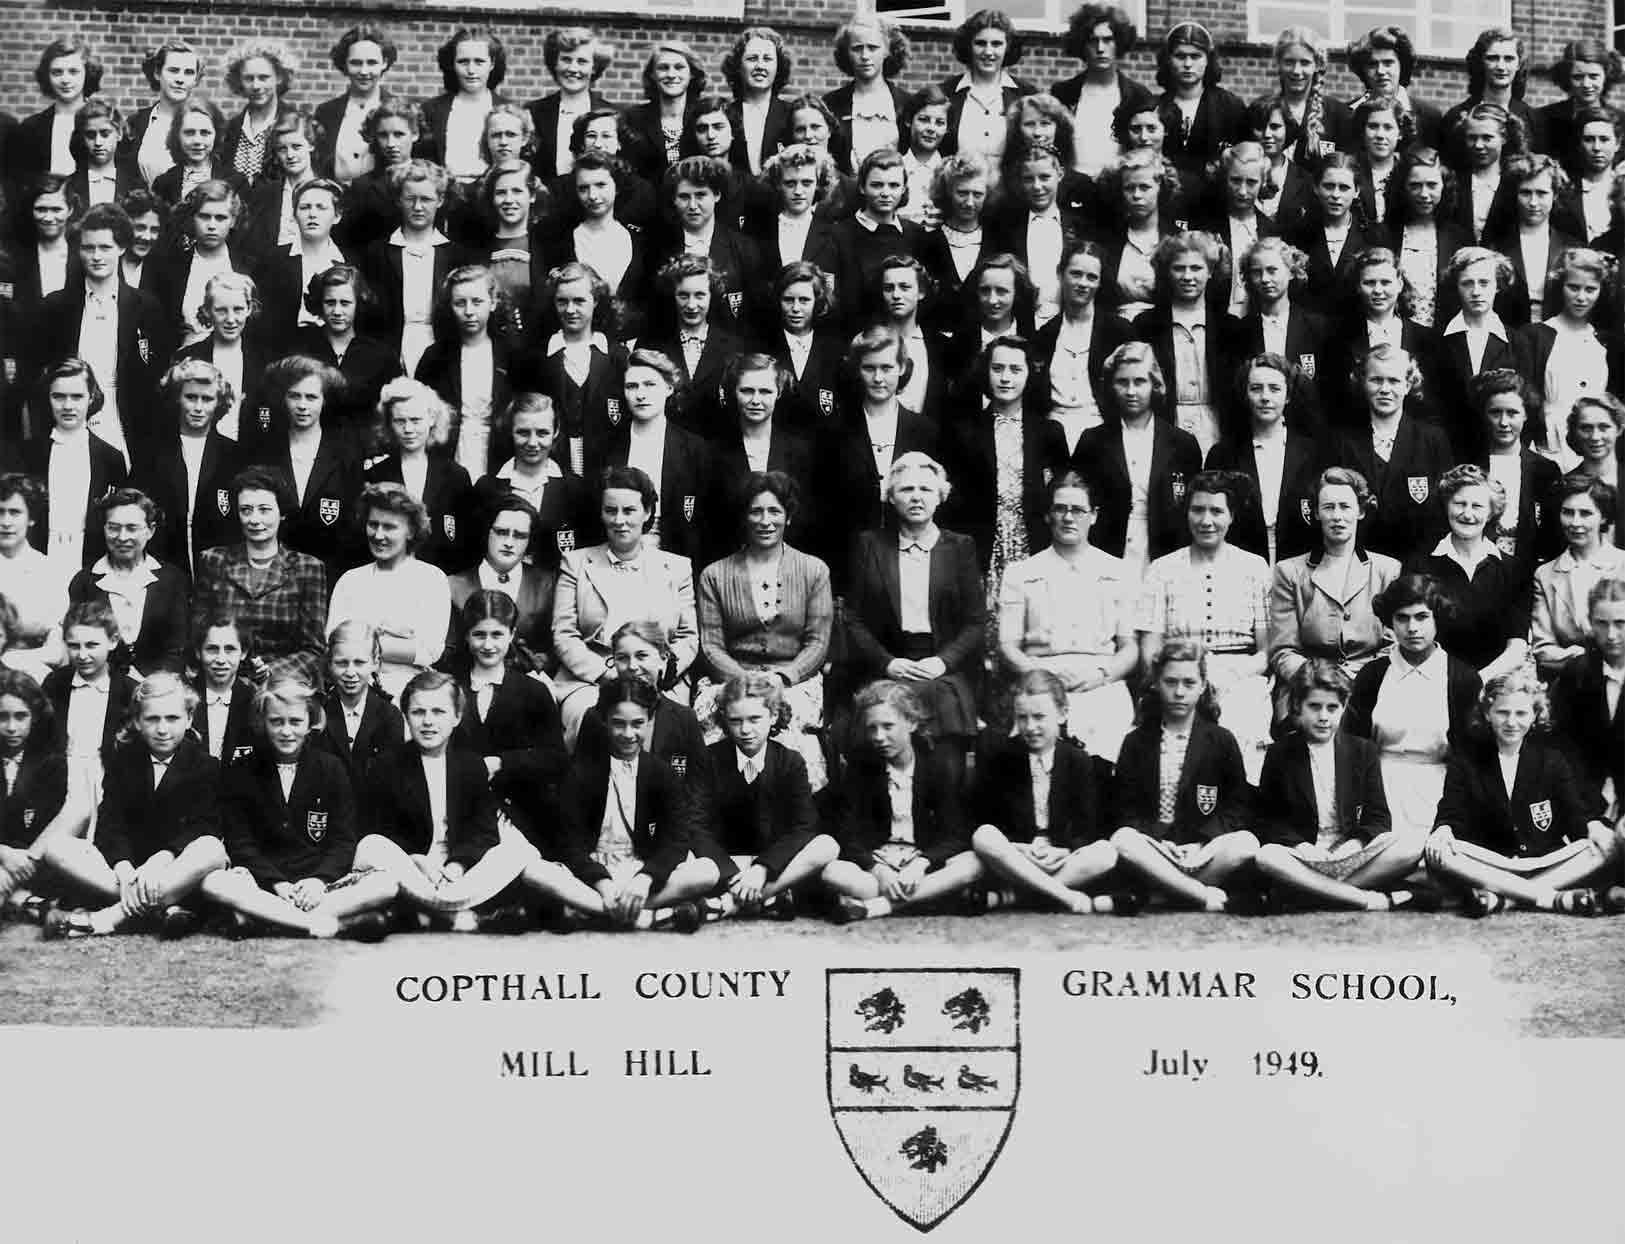 Third left section of the 1949 school photograph for Copthall County Grammar School